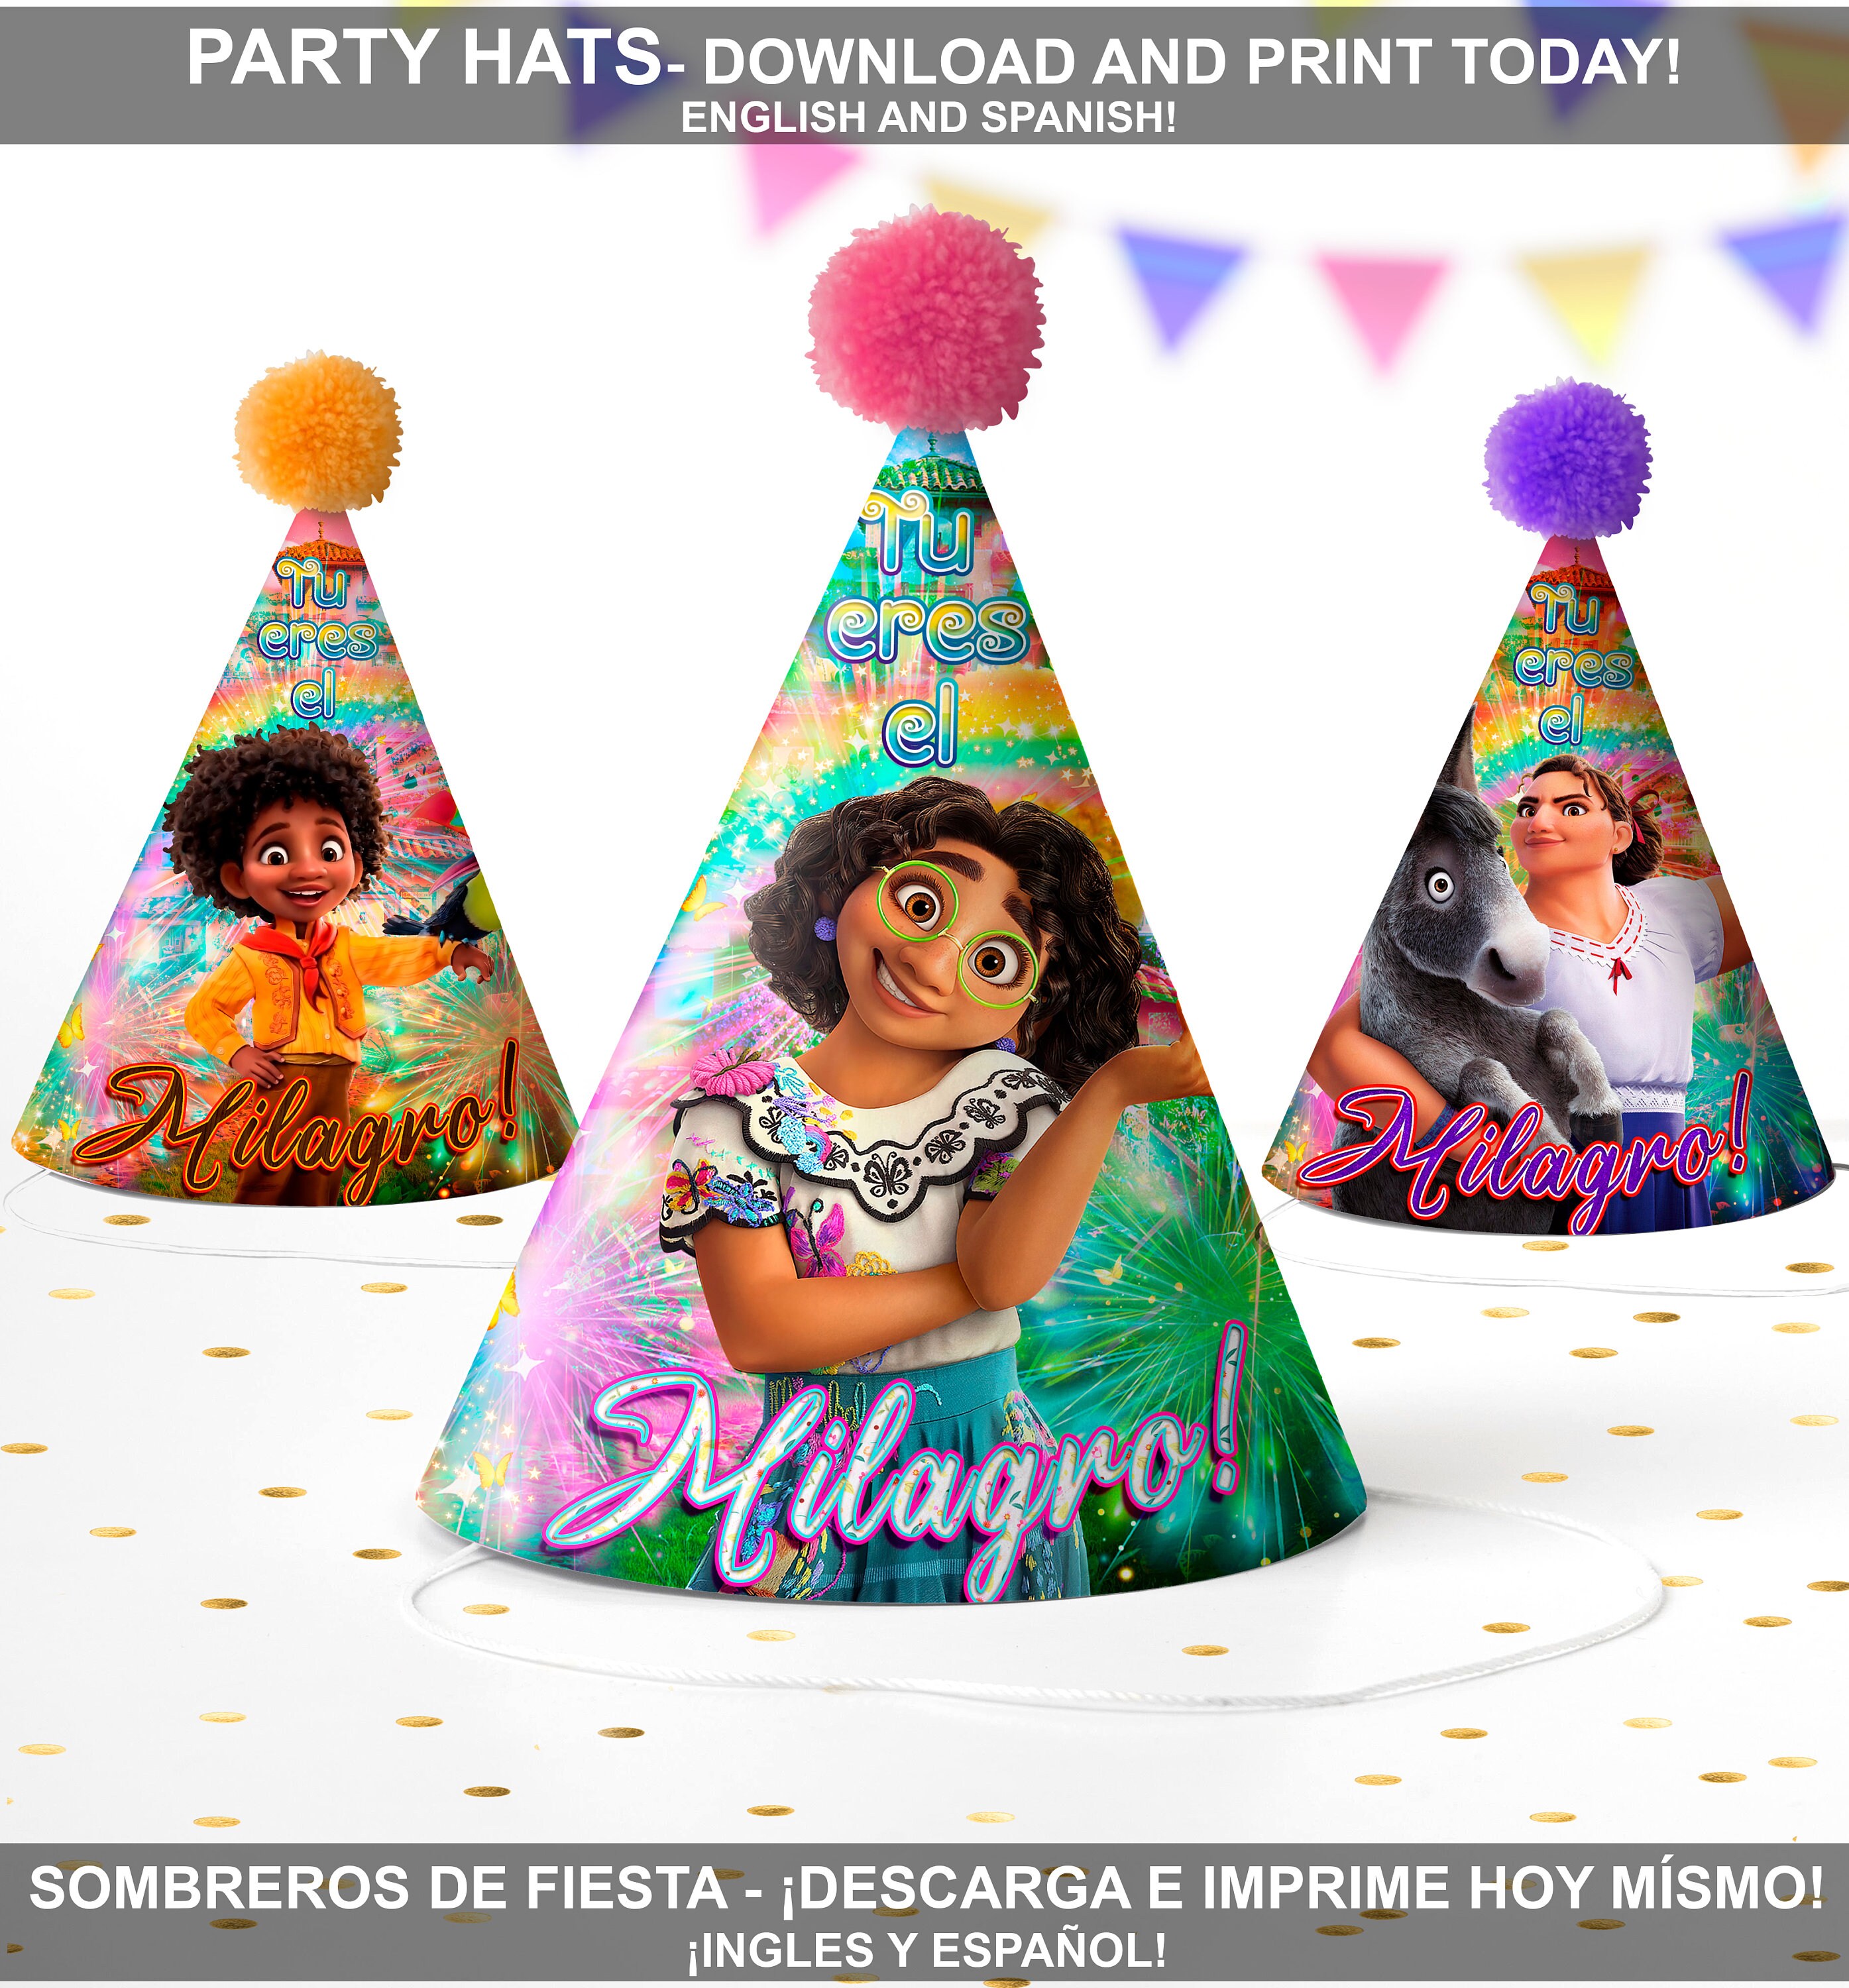 Violetta: Free Printables Party Invitations. - Oh My Fiesta! in